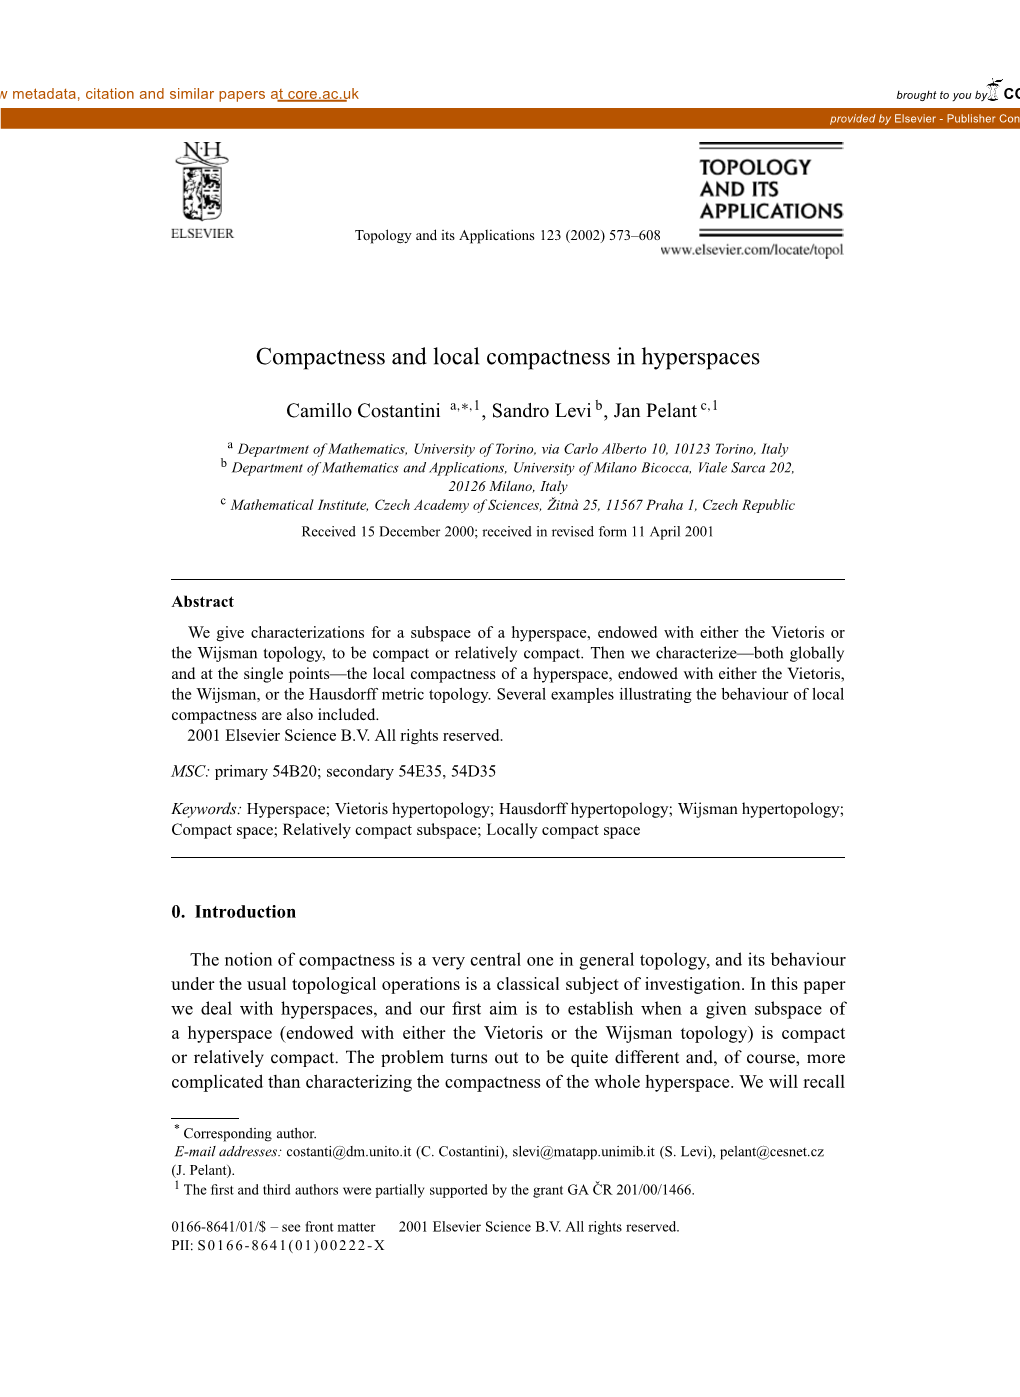 Compactness and Local Compactness in Hyperspaces